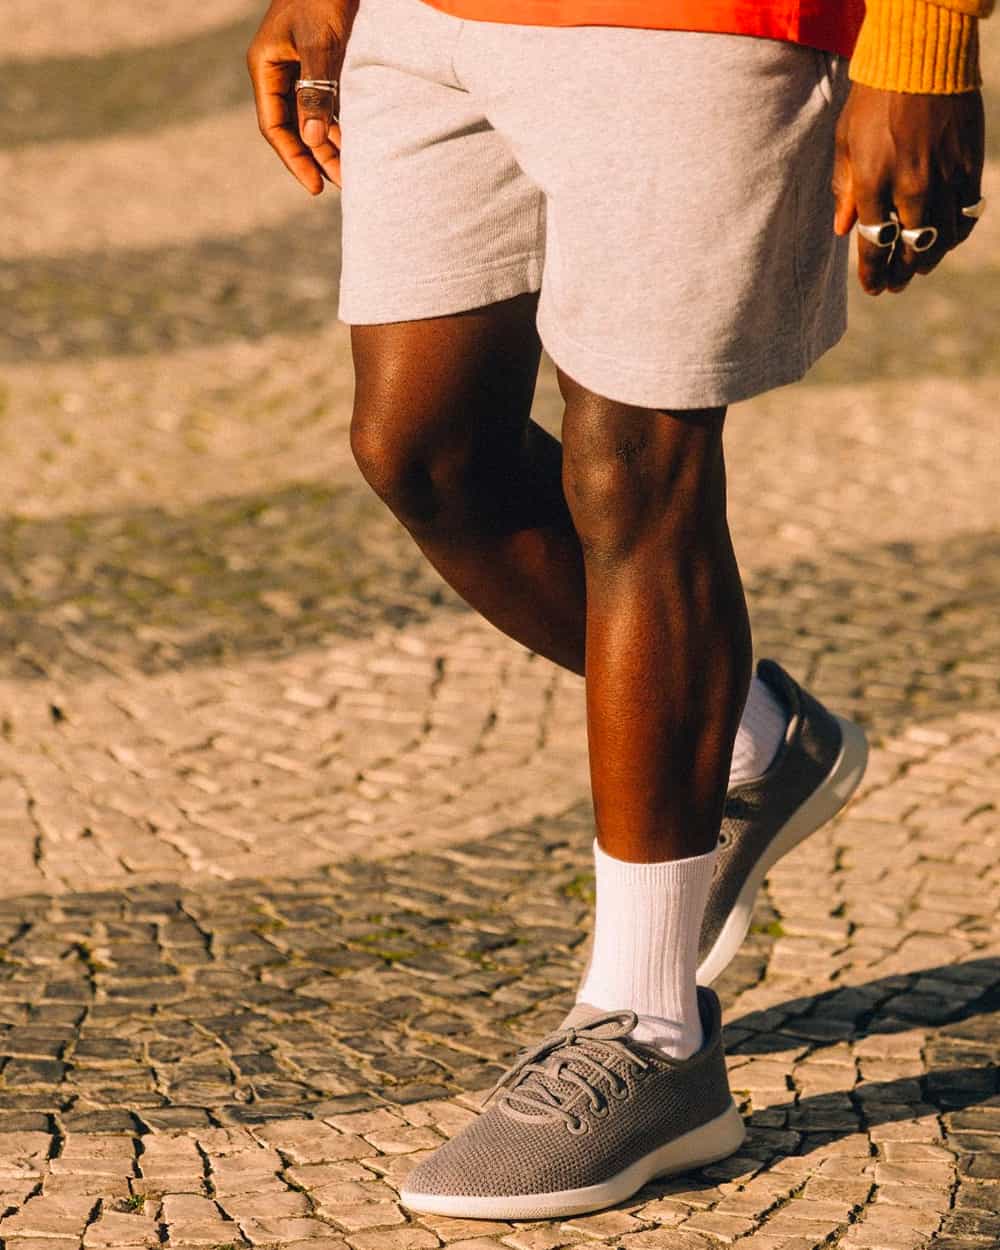 Man wearing AllBirds Tree Runner sneakers on feet with white socks and grey jersey shorts